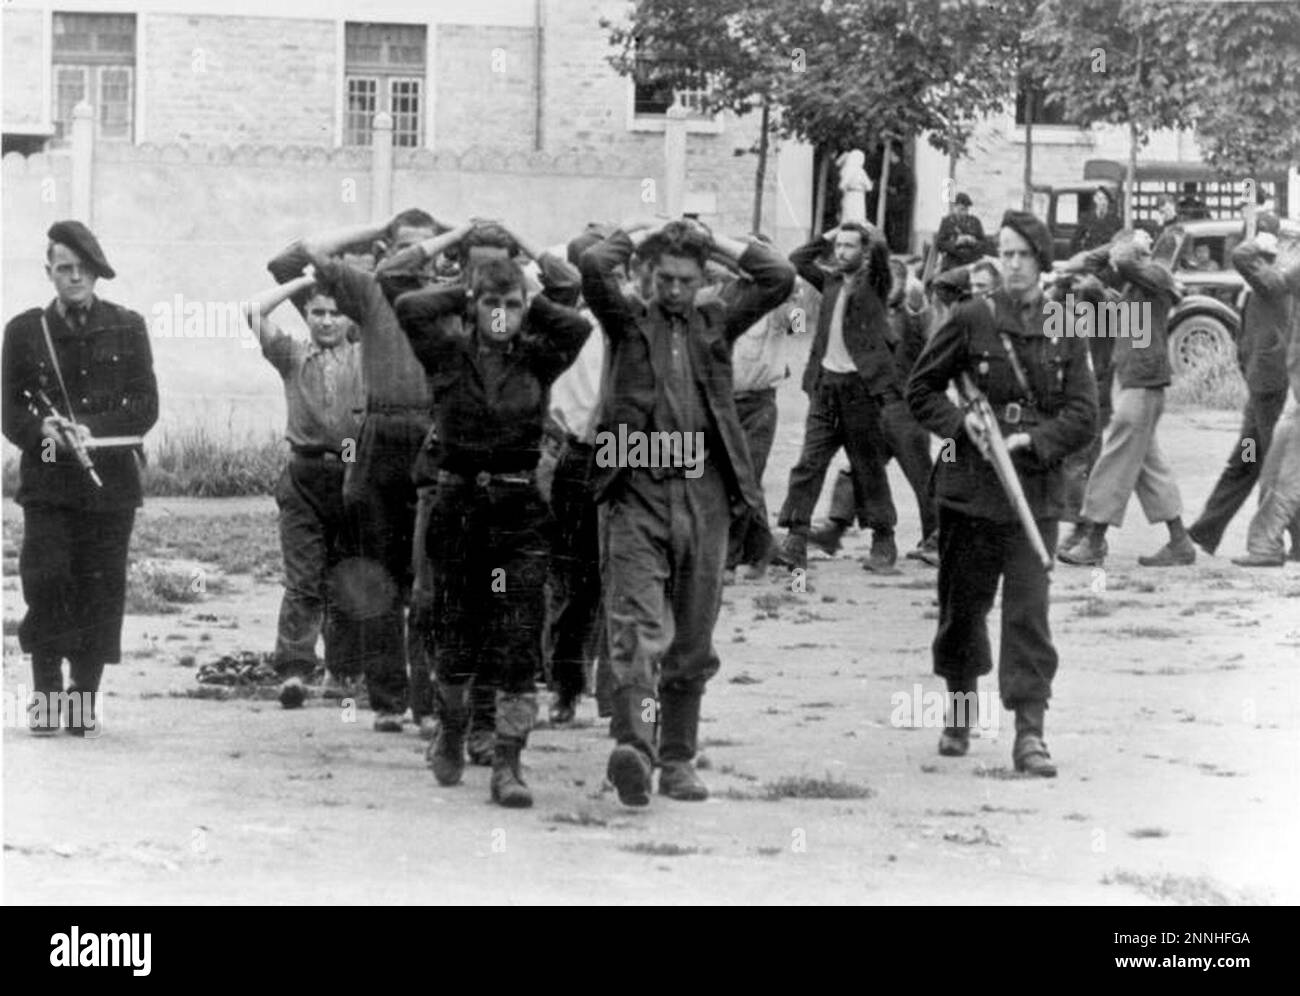 French milice (in uniform with guns) escort Resistance prisoners in July 1944. The Milice were the Vichy French (ie collaborators with the nazi regime) militia . Photo Bundesarchiv, Bild 146-1989-107-24 / Koll / CC-BY-SA 3.0, CC BY-SA 3.0 de, https://commons.wikimedia.org/w/index.php?curid=5419501 Stock Photo